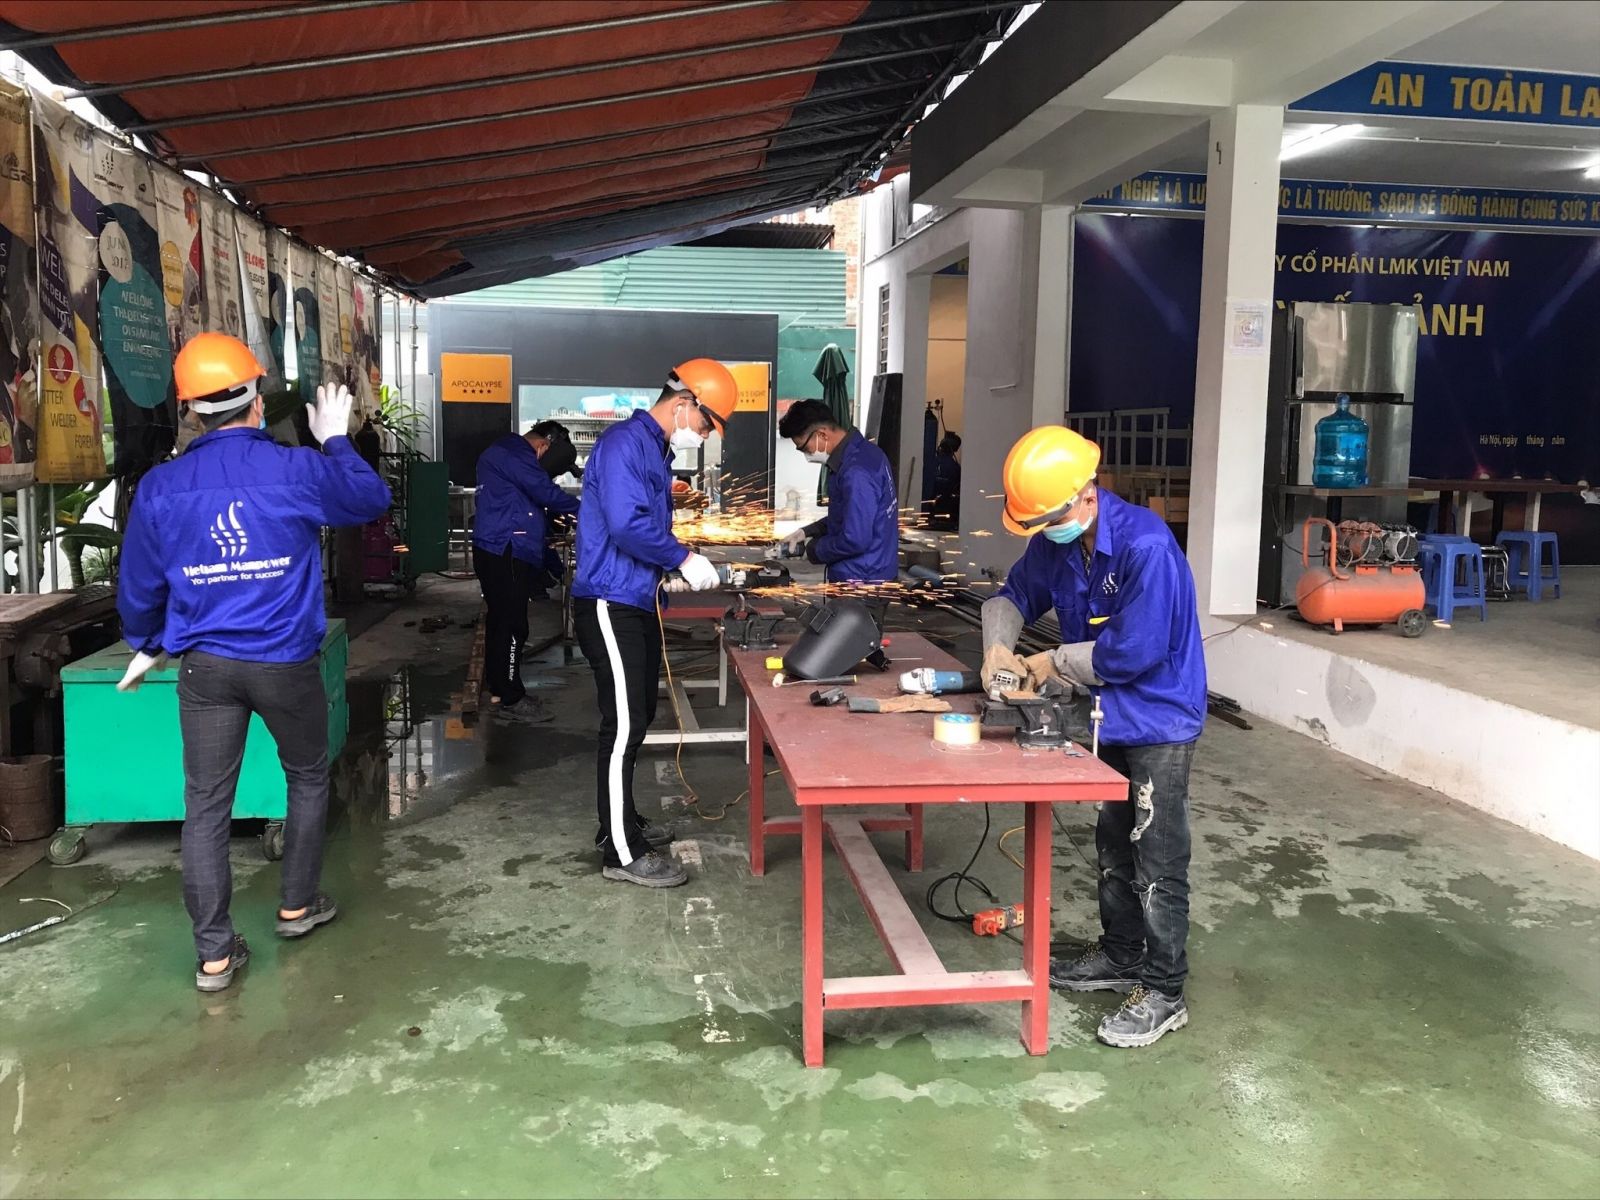 Vietnam Manpower successed recruit workers for Riela Company in Romania